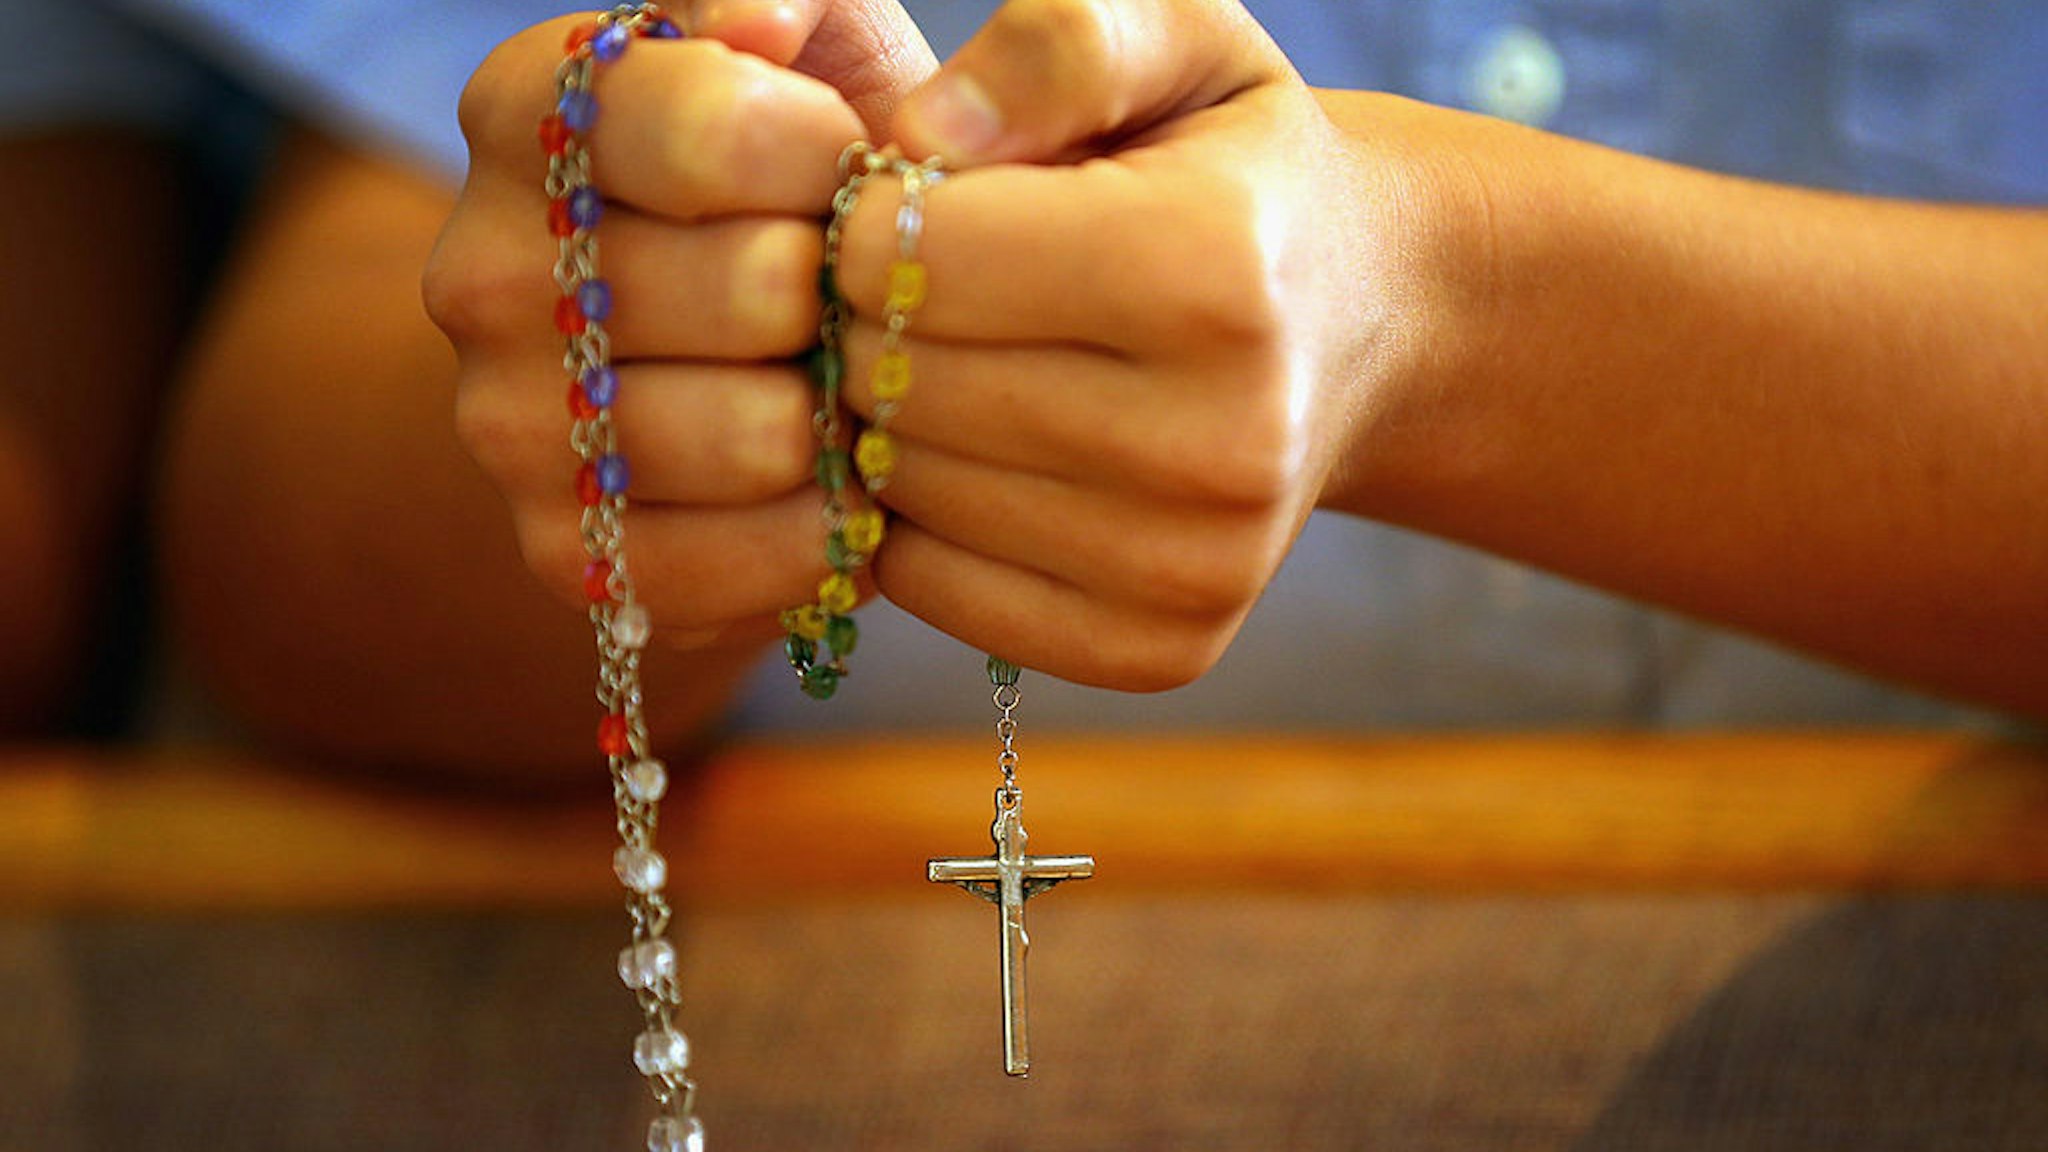 MIAMI, FL - DECEMBER 21: A child holds rosary beads as she prays during a service at St. Rose of Lima School, for the victims of the school shooting one week ago in Newtown, Connecticut on December 21, 2012 in Miami, Florida. Across the country people marked the one week point since the shooting at Sandy Hook Elementary School in Newtown, Connecticut that killed 26 people. (Photo by Joe Raedle/Getty Images)